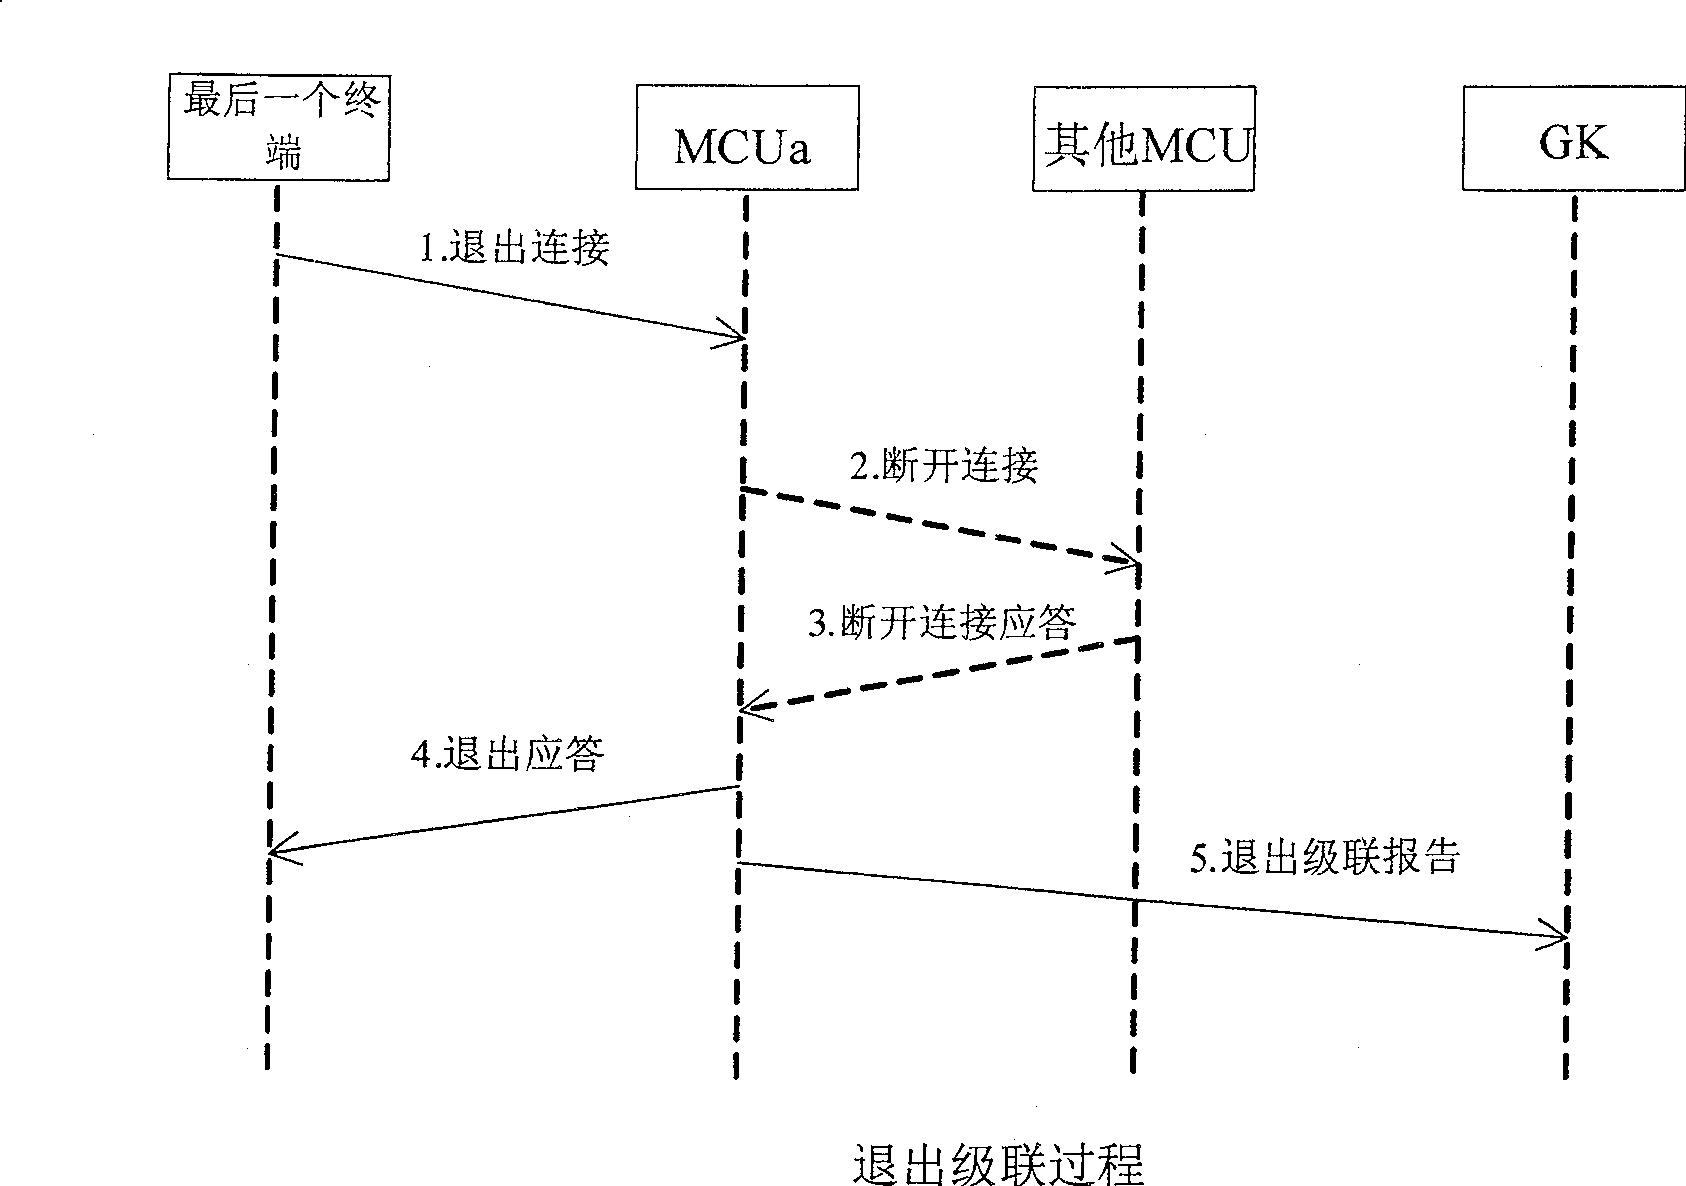 Audio mixing method in multiple-MCU video conference system